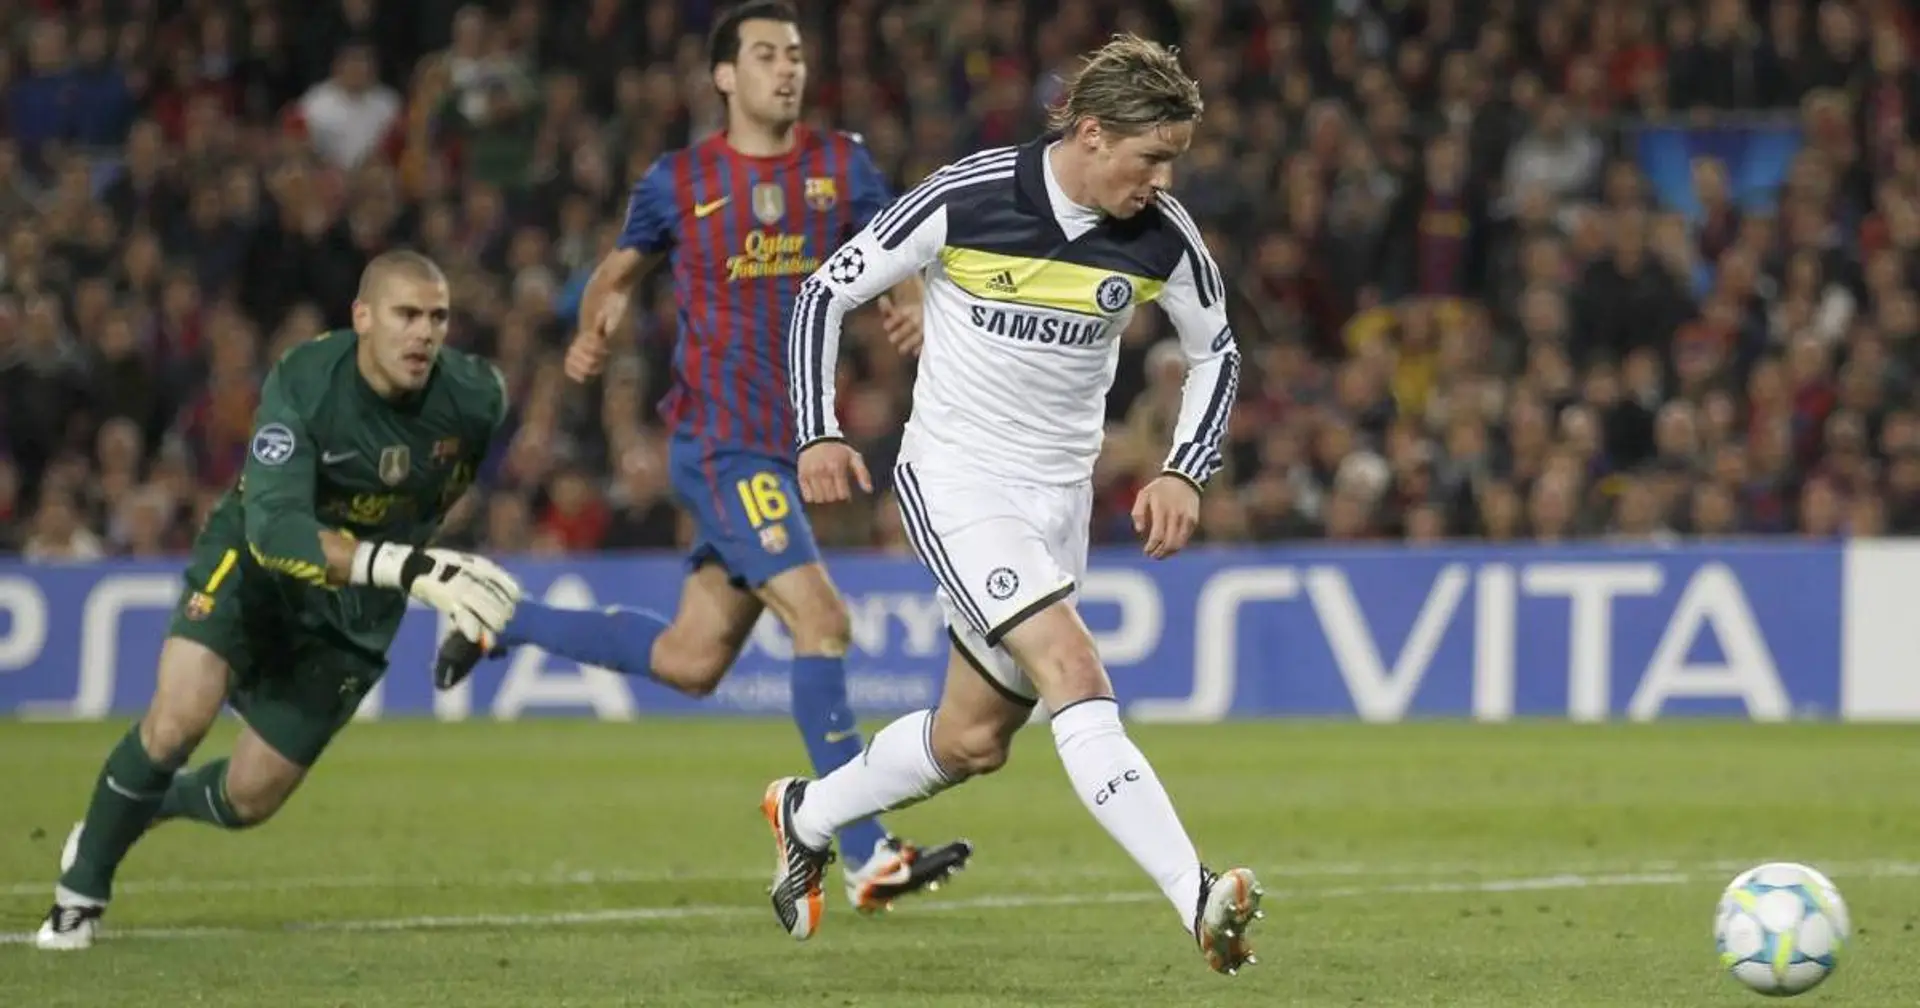 'Fernando Torres has done it!': On former Blue's birthday, relive the goal that helped Chelsea reach 2012 Champions League final